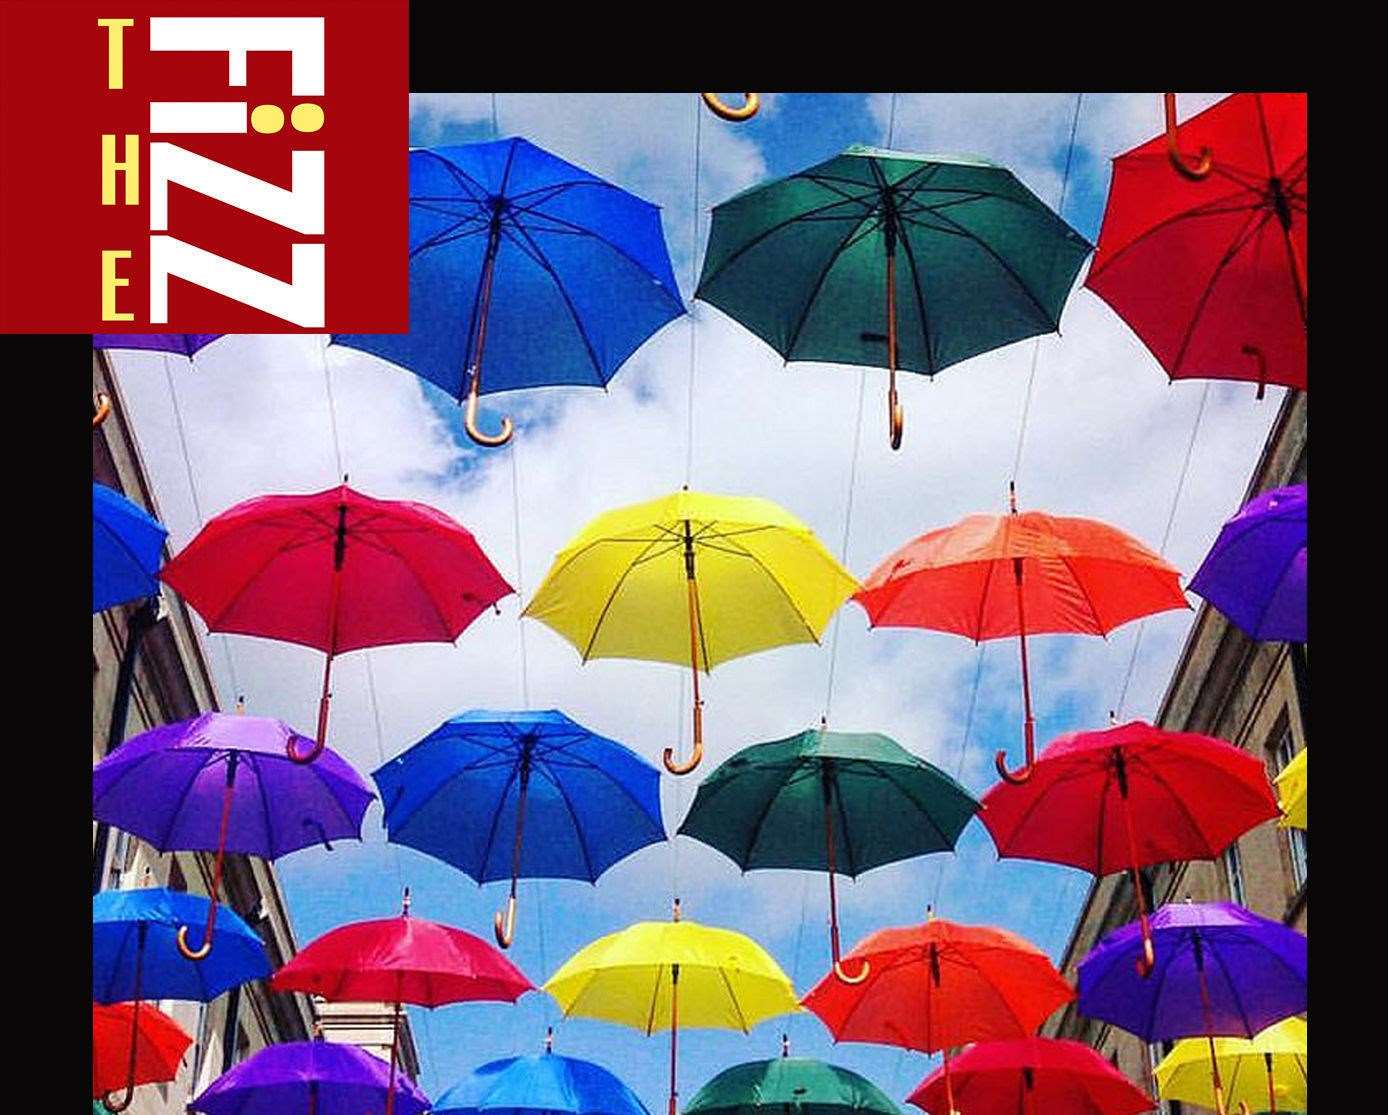 Dancing in the Rain by The Fizz single cover Picture: PA Photo/MPG Records